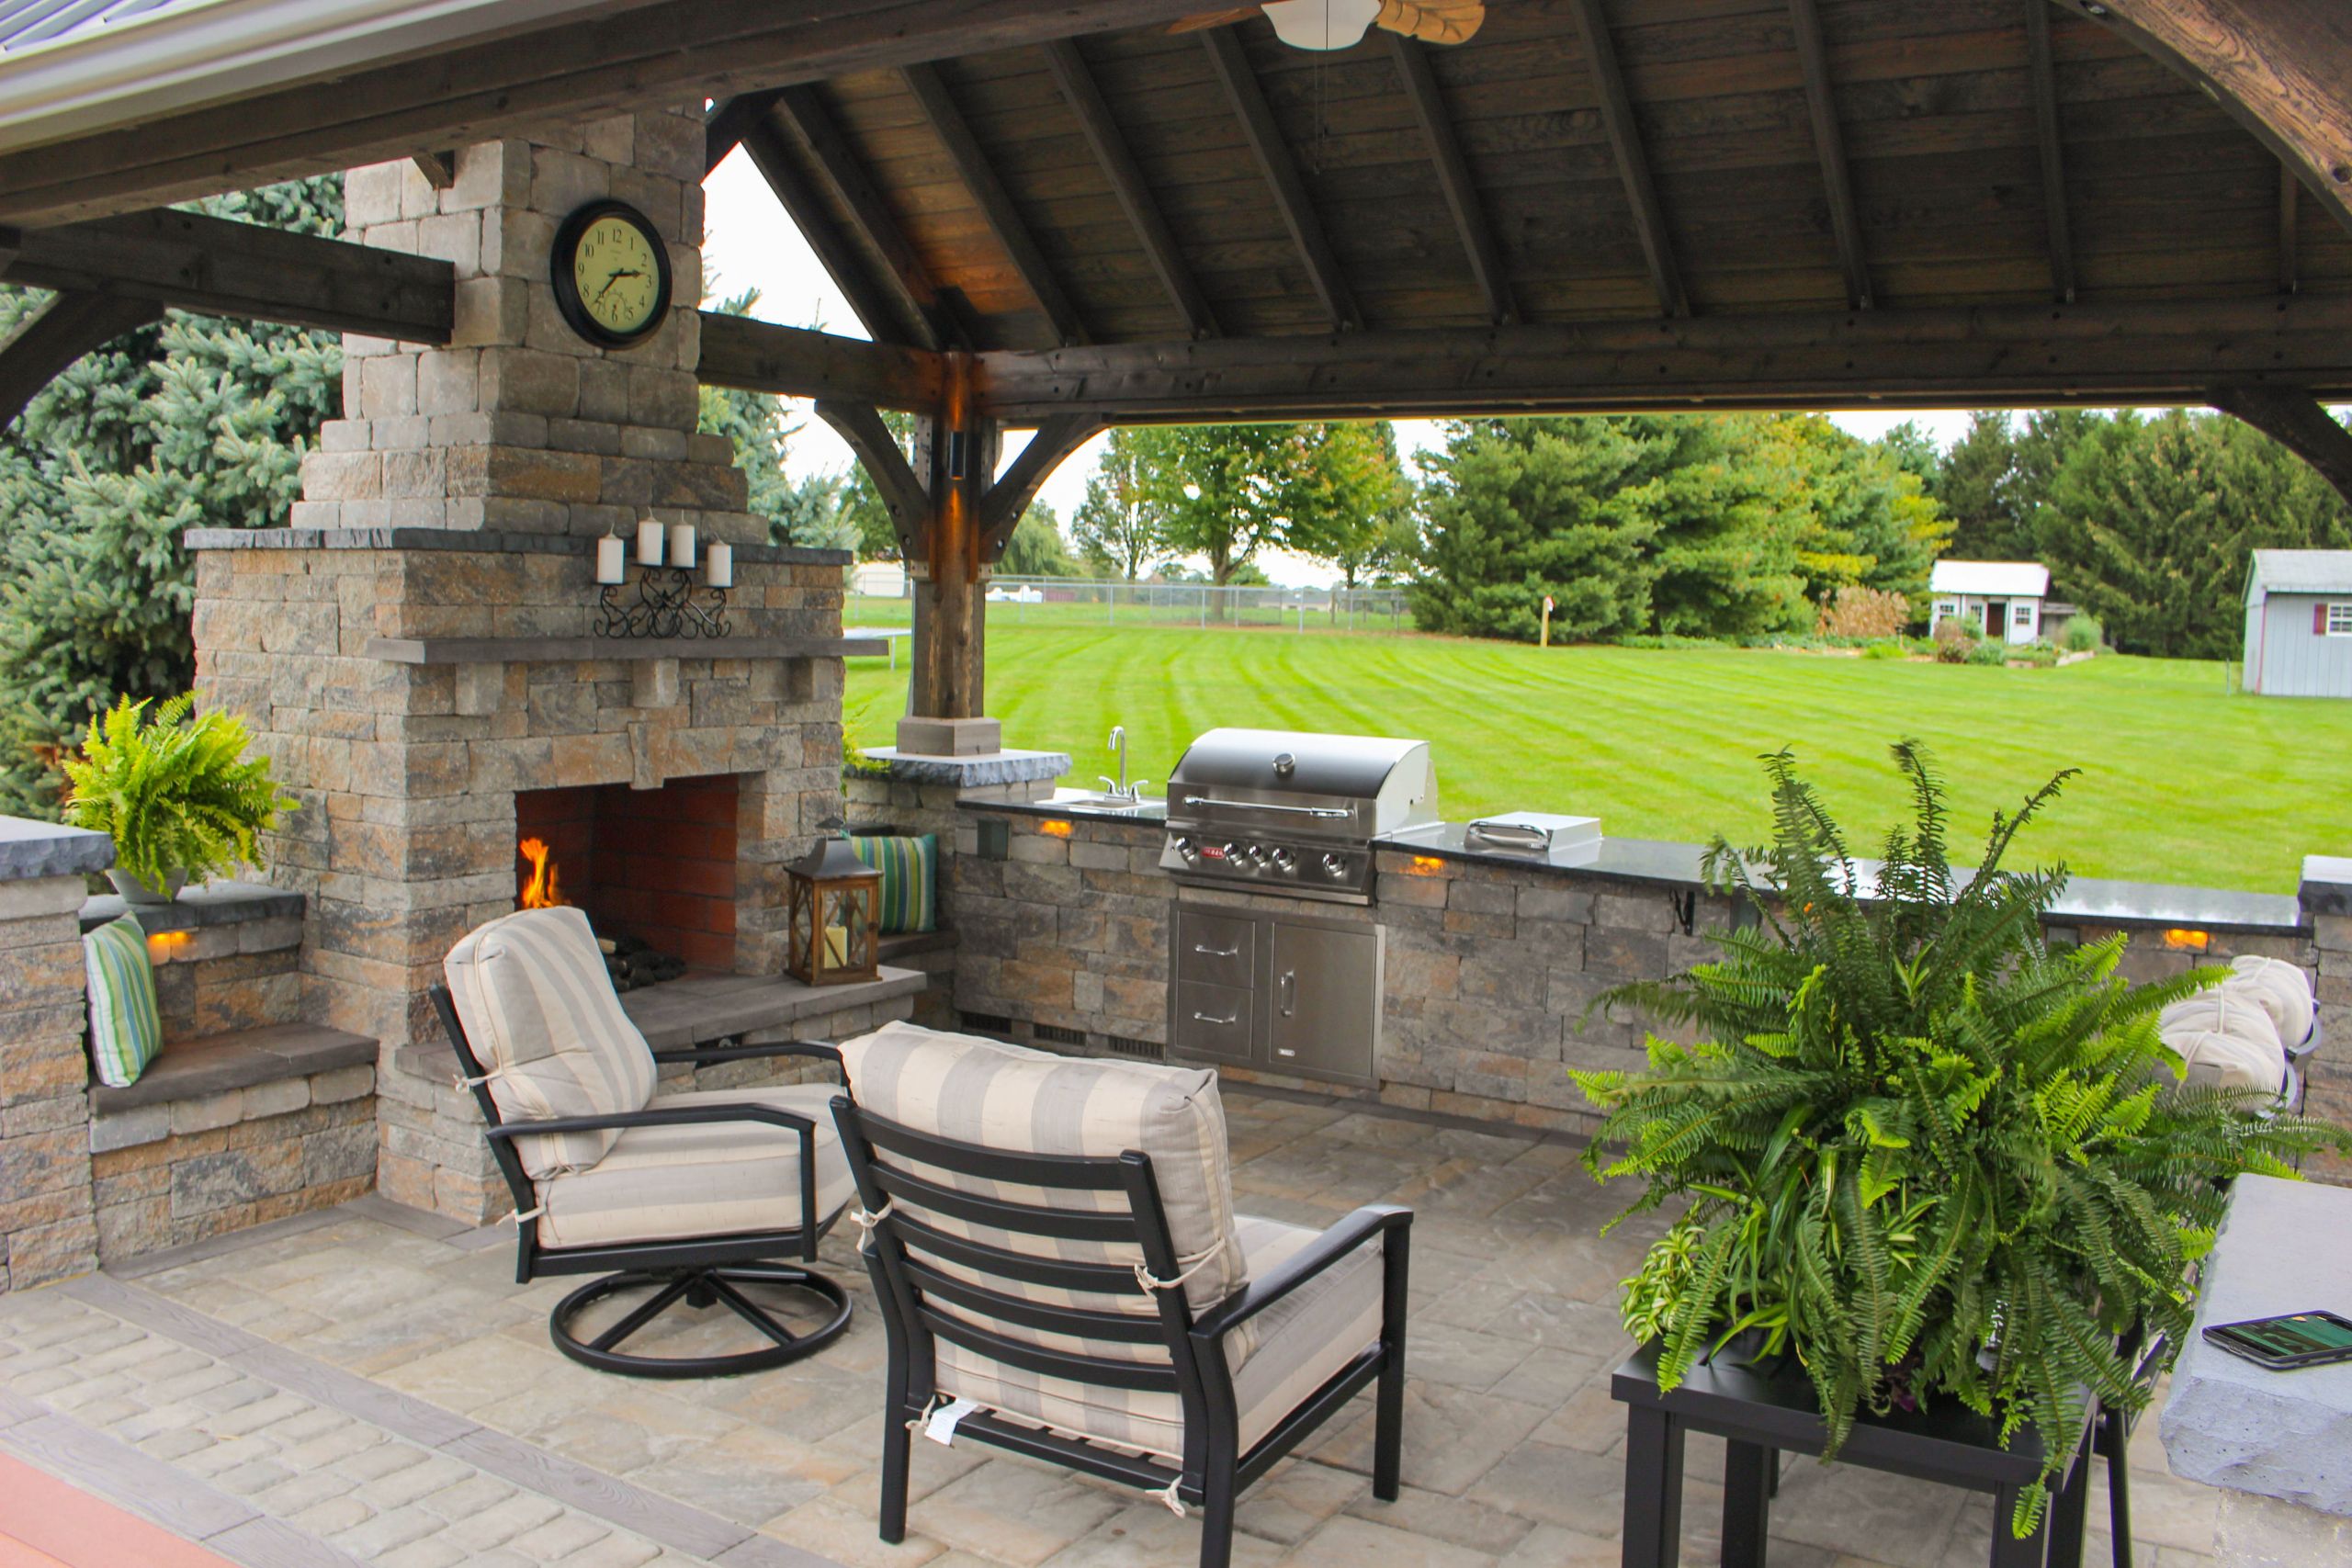 Outdoor Kitchen Deck
 Outdoor Patio with Pavilion